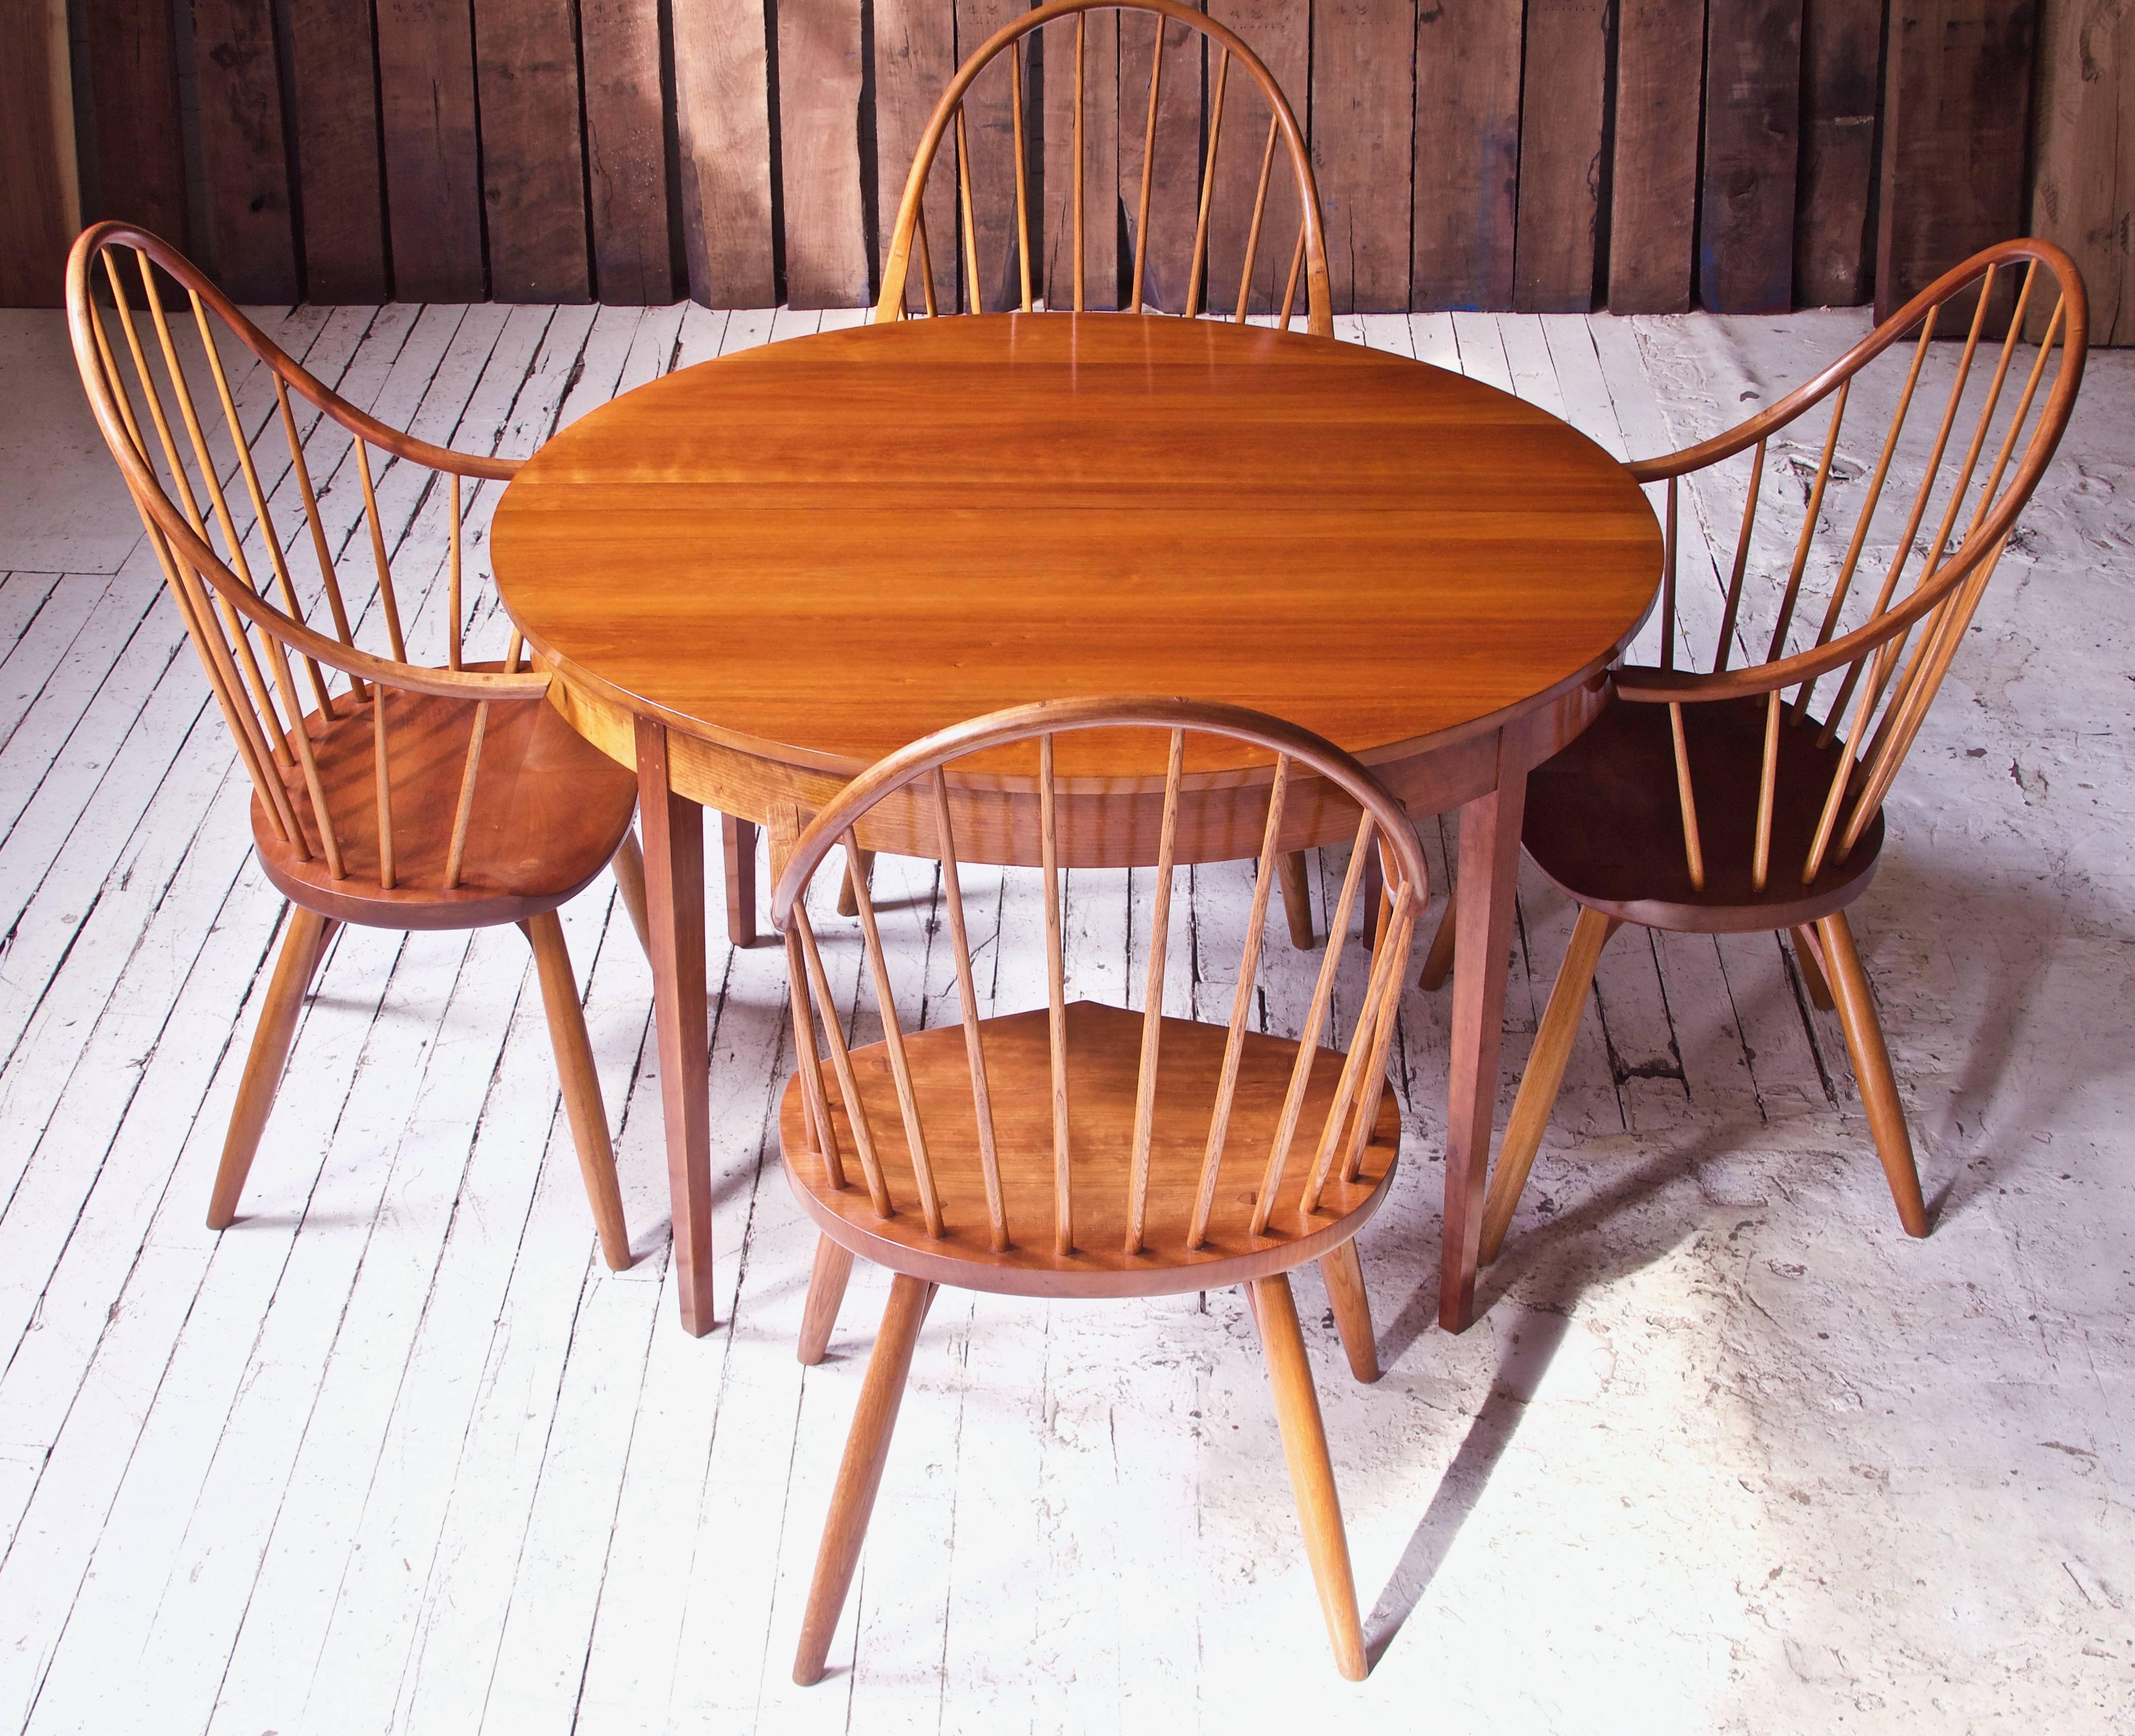 Gorgeous dining set comprised of one table with additional leaf and four armchairs; handmade by Thomas Moser Cabinetmakers 1985-86. Purchased directly from the estate of the original owner, this set has been lovingly conditioned and refinished. The